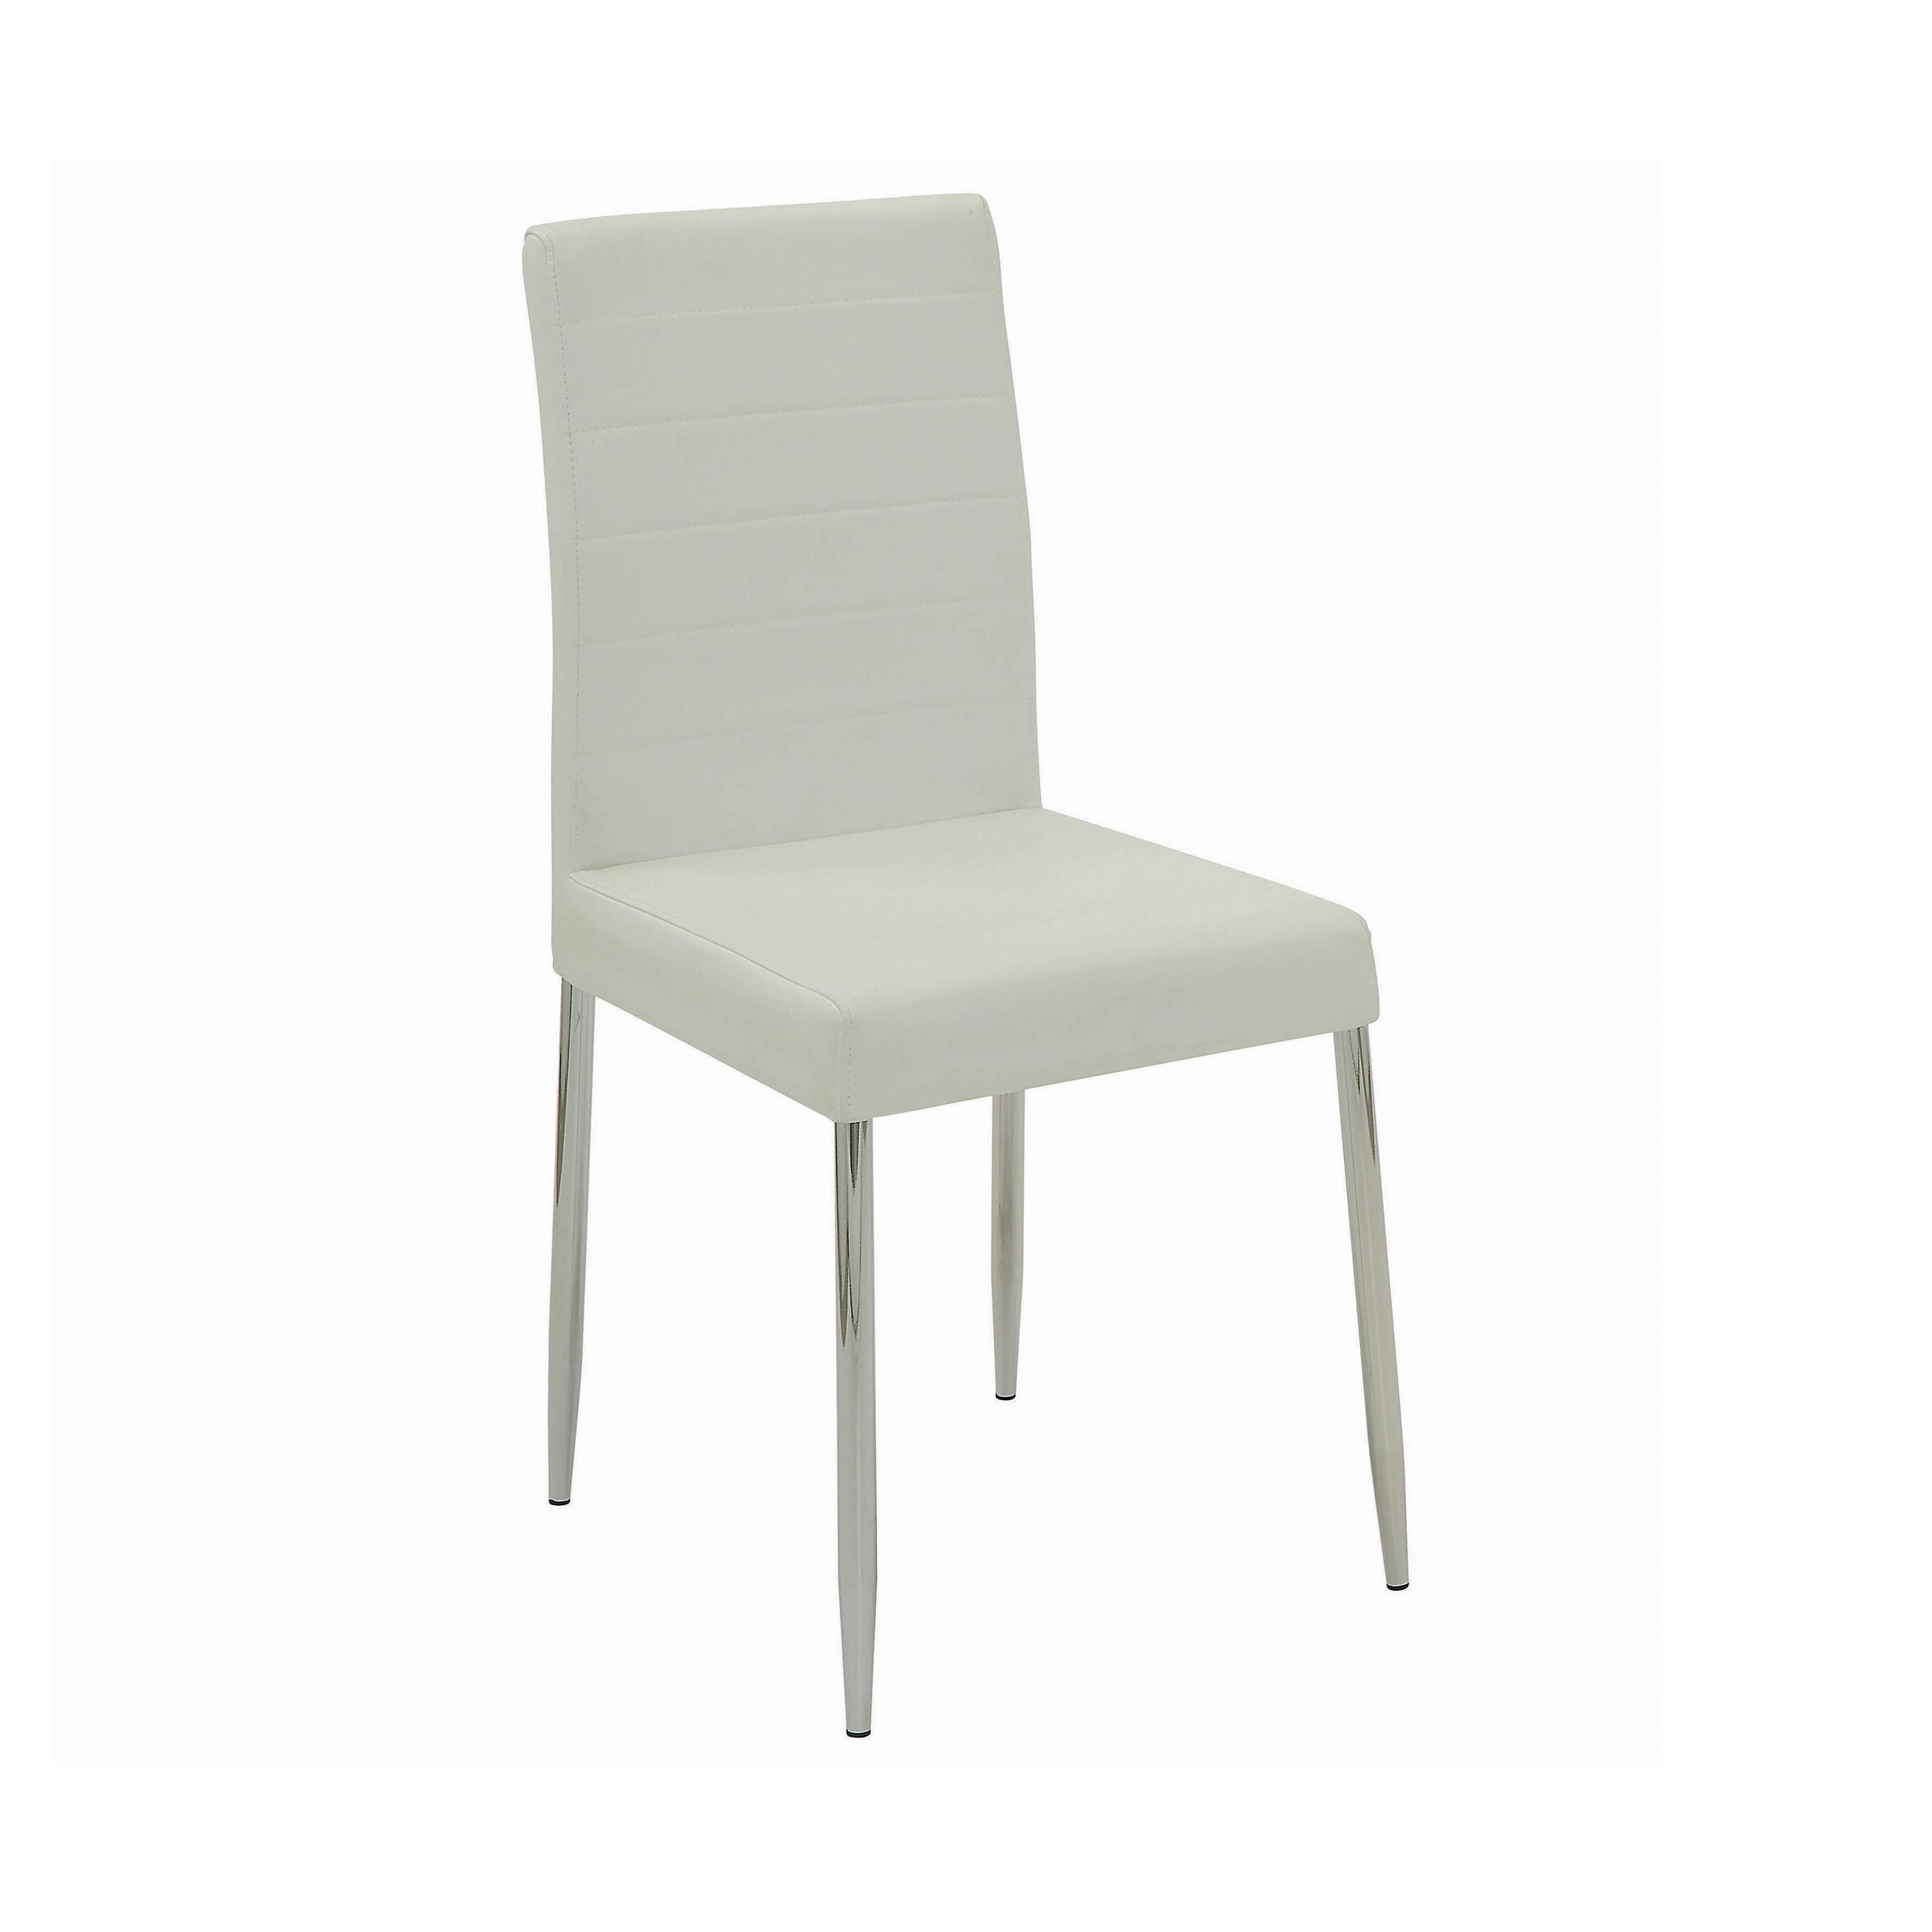 Contemporary Dining Chair Set 120767WHT Vance 120767WHT in White Leatherette